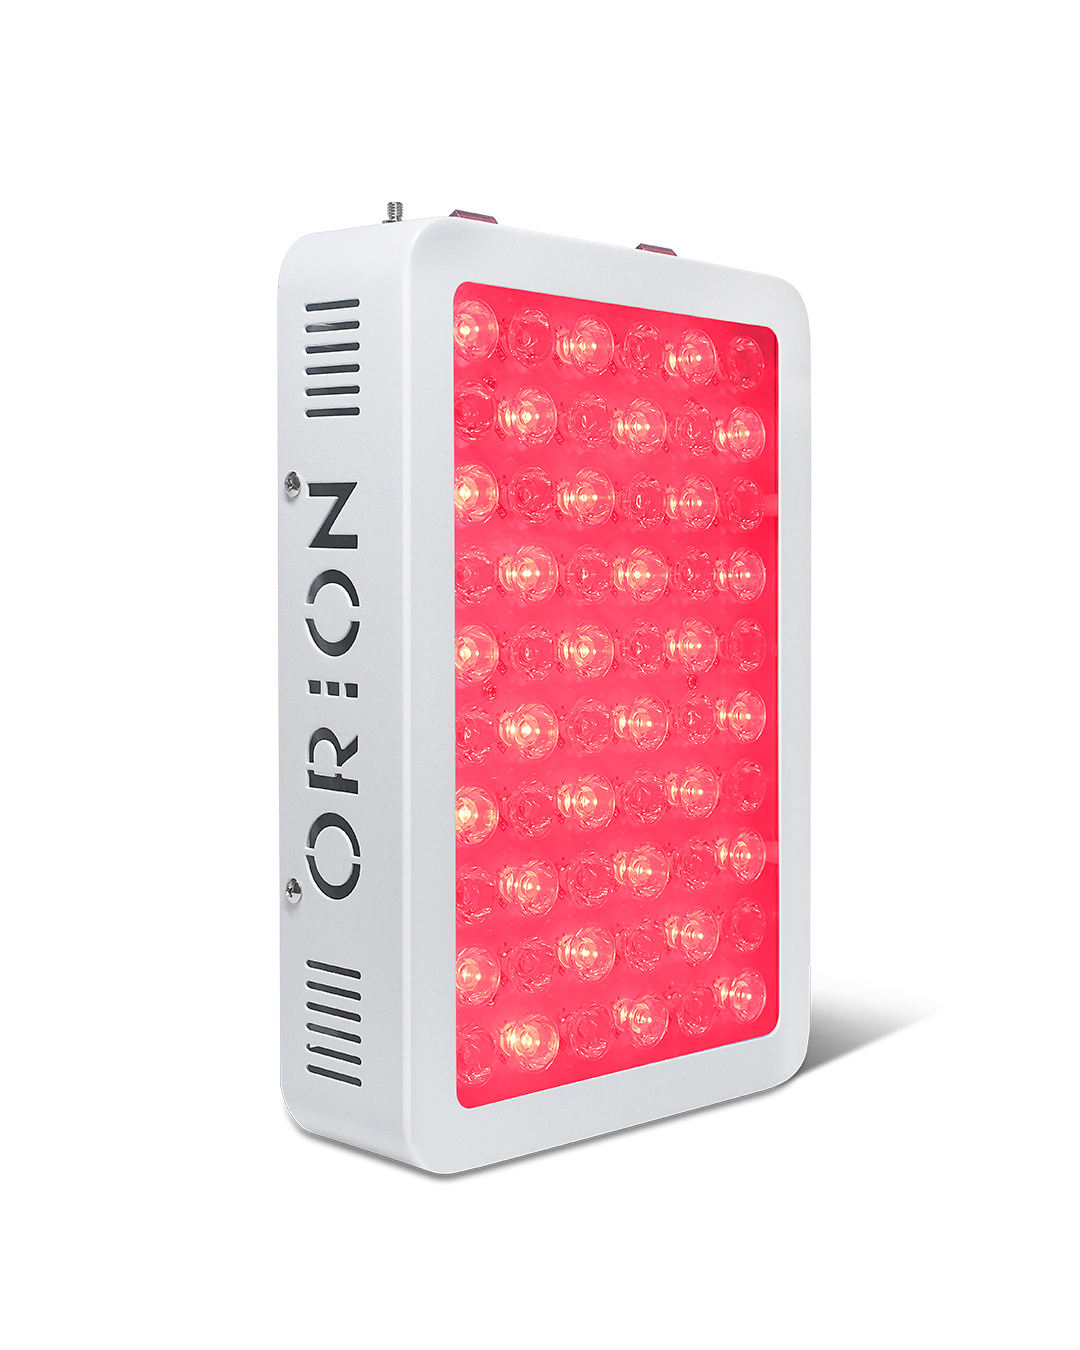 Orion 300 turned on. Orion Red Light Therapy. LED Light Therapy. Improves Collagen Production. Mitochondria. Muscle Recovery and Performance.